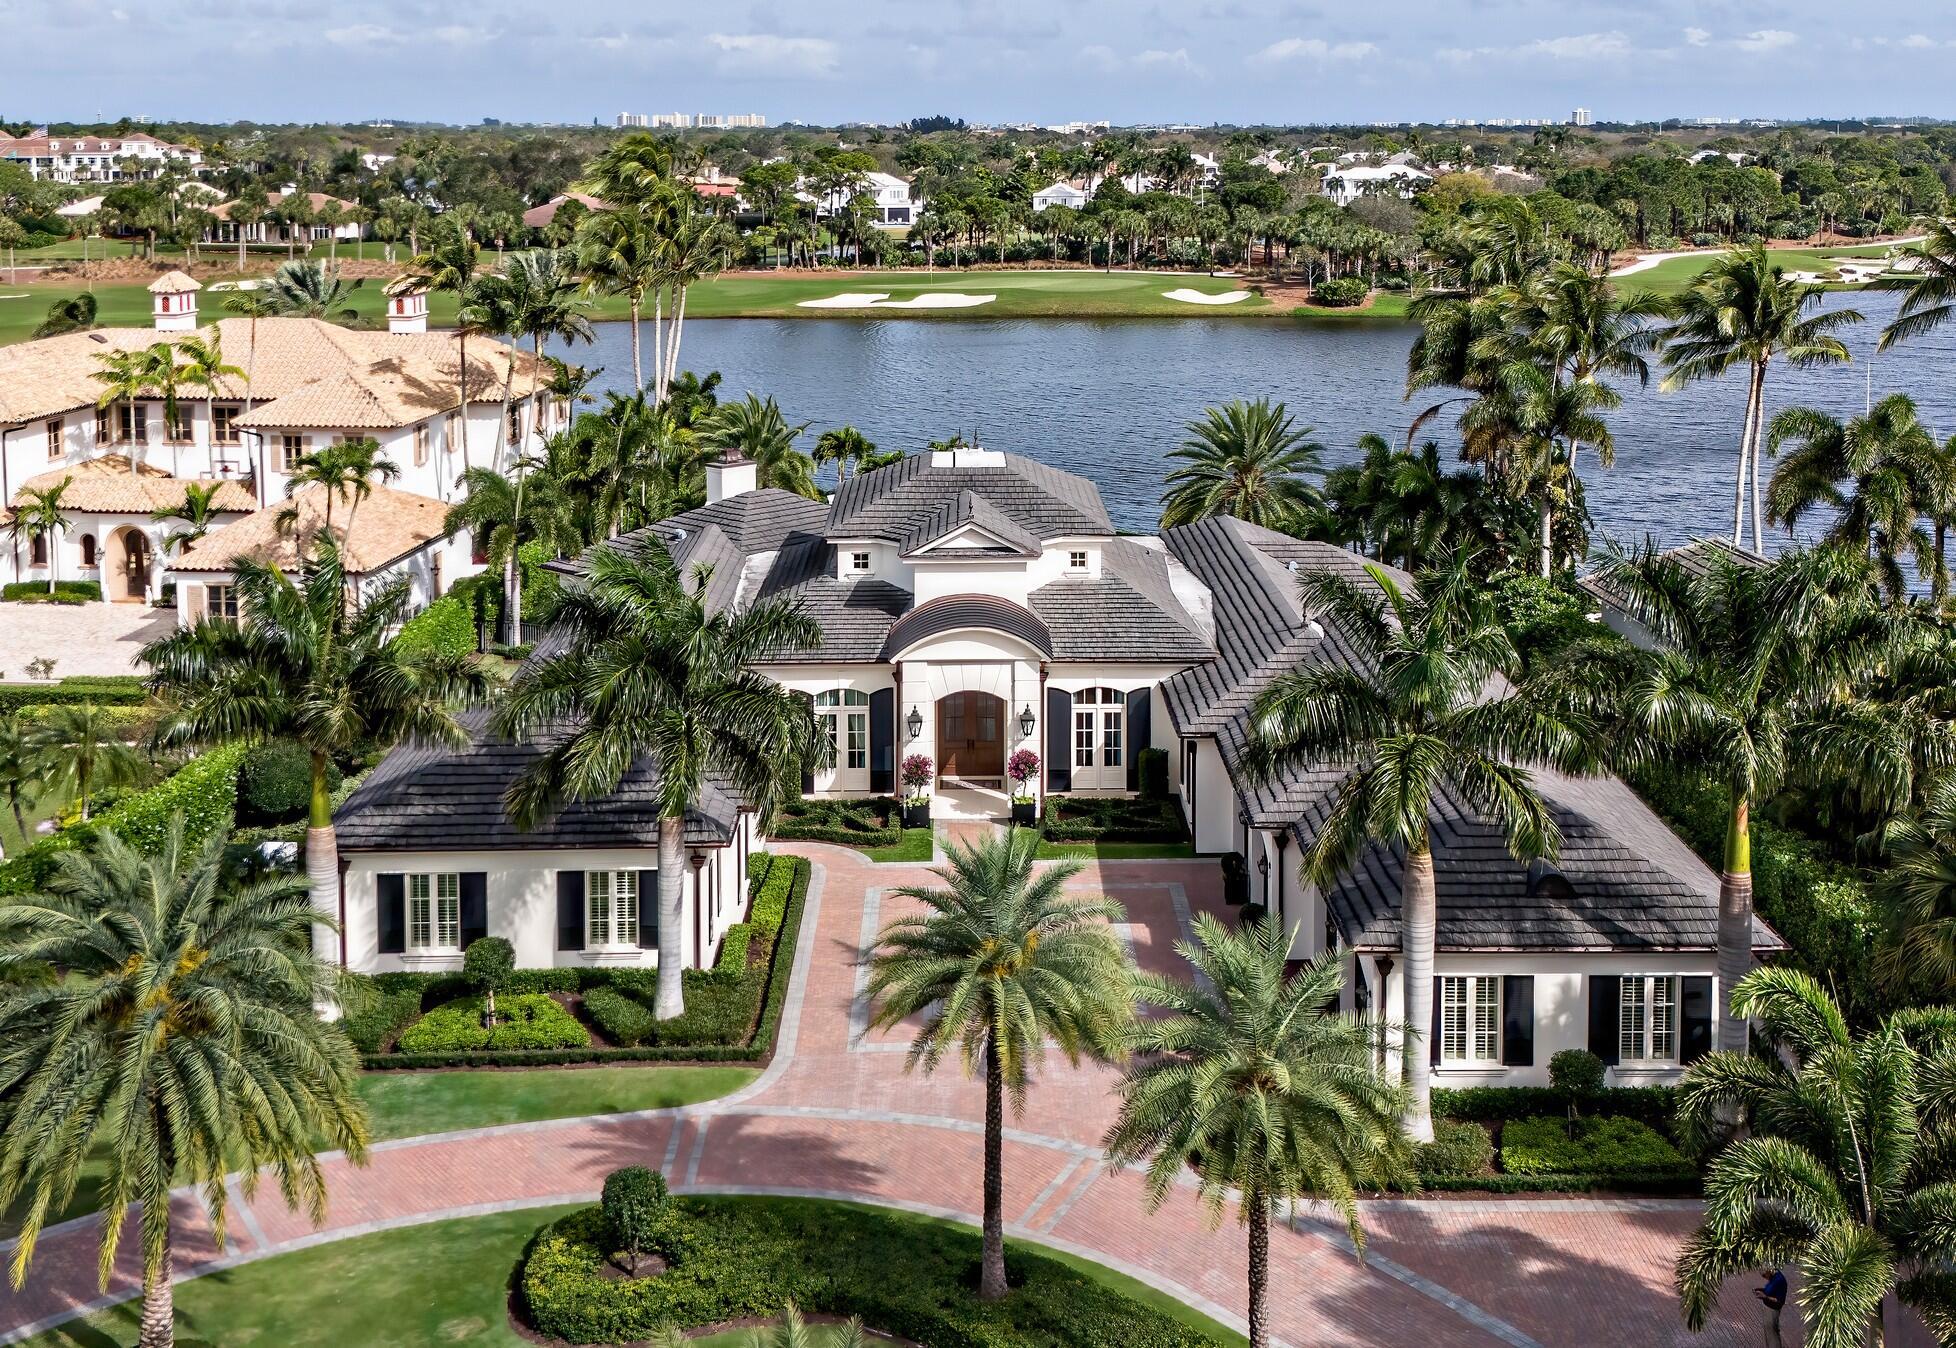 Presenting an unparalleled waterfront residence on a spectacular .8 acre lakefront lot within the prestigious Loxahatchee Golf Club. This sprawling 6,355 square foot single-story estate has been masterfully rebuilt in 2020, offering a total of 9,150 square feet of luxurious living space designed for those who appreciate the finer things in life.This exquisite home boasts an open floor plan that seamlessly blends indoor and outdoor living. The heart of this estate is a chef's dream, an oversized kitchen equipped with high-end gourmet appliances, perfect for culinary exploration. The adjoining wine room can house over 450 bottles, ensuring every occasion is well catered for.SEE MORE Accommodations include two master suites and three generously sized bedrooms as well as 6.5 lavish bathrooms. The home also features a his and her office, providing ample space for professional activities and creative endeavors. The custom wood beam detail in the family room ceiling is a testament to the unique architectural design that spans throughout the residence.

Step outside to the breathtaking outdoor living area, complete with a living space, a cozy fireplace, and a fully equipped outdoor kitchen. The amazing pool, spa, and fire pit overlook the tranquil waters, making it an ideal setting for entertaining and relaxation.

Situated on the most desirable lot in The Loxahatchee Club, the property offers long and wide views of the pristine lake, making it one of the most incredible estate homes ever to be sold in this community.

This home not only promises a serene and luxurious lifestyle but also an investment in exquisite craftsmanship and architectural finesse. Make 236 Locha Drive your new sanctuary, where every detail is a stroke of genius and every day is a glimpse of paradise.